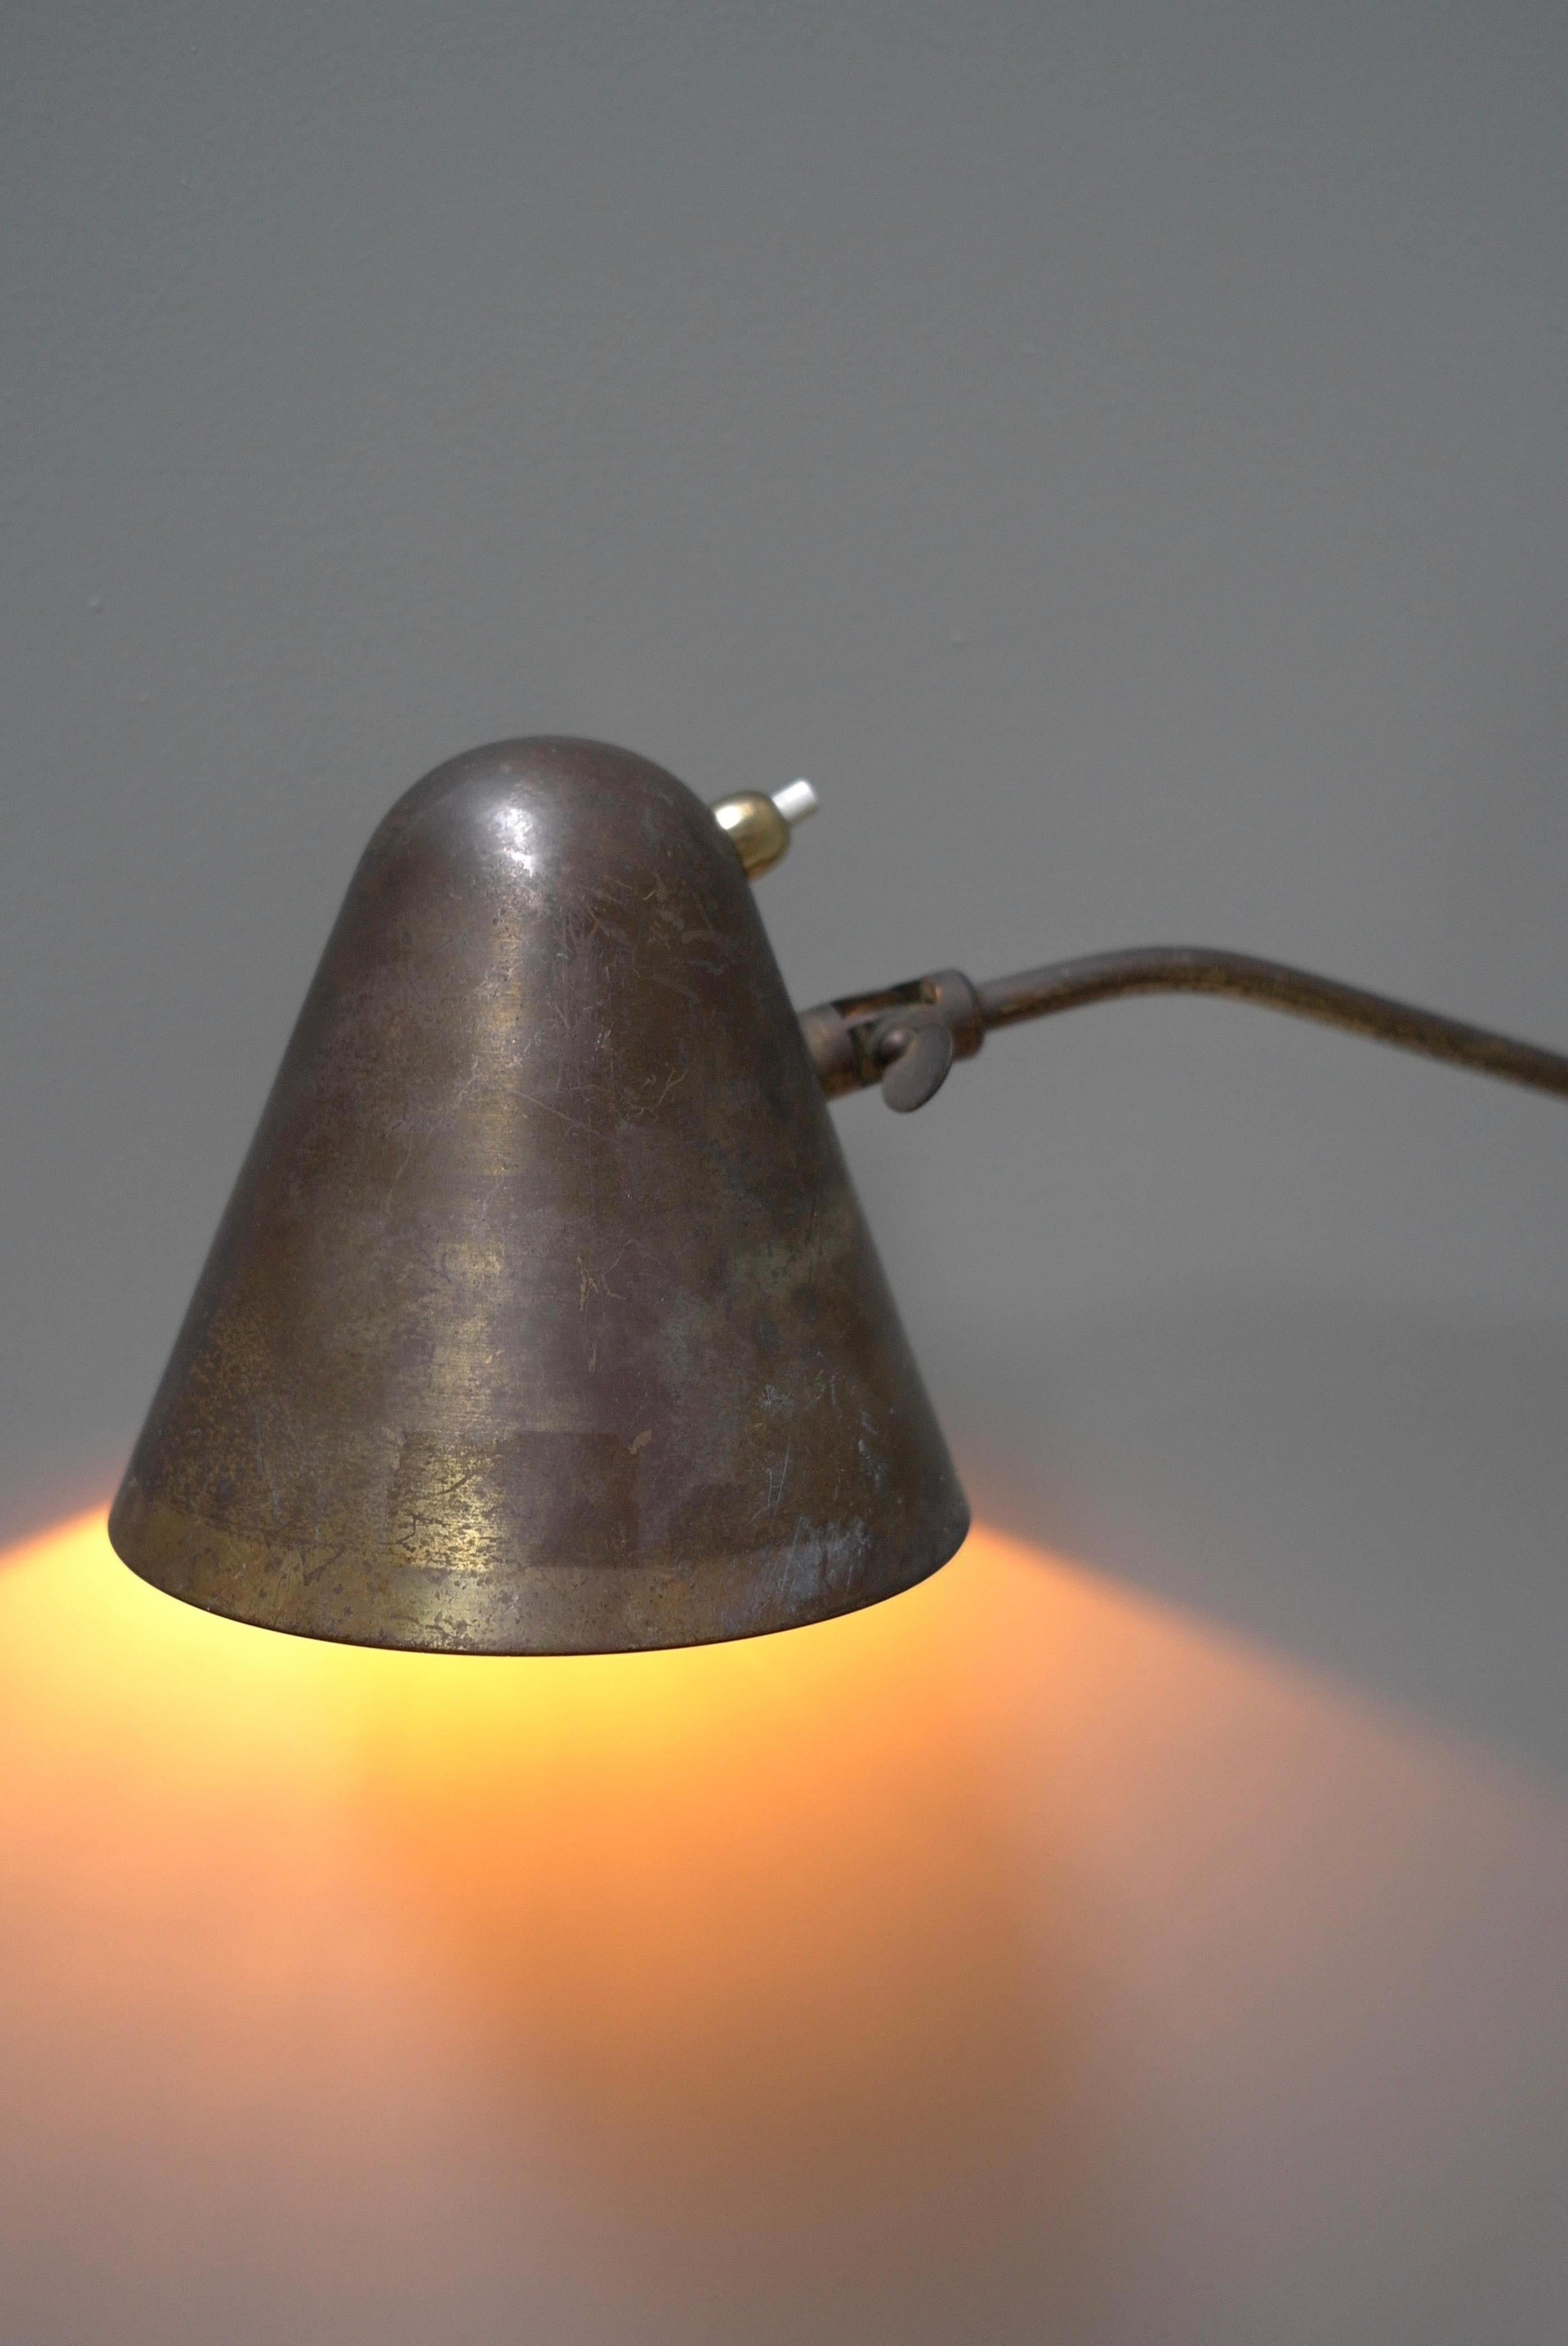 Mid-20th Century Th. Valentiner by Poul Dinesen Copper Scissor Wall Lamp, Denmark 1950s For Sale